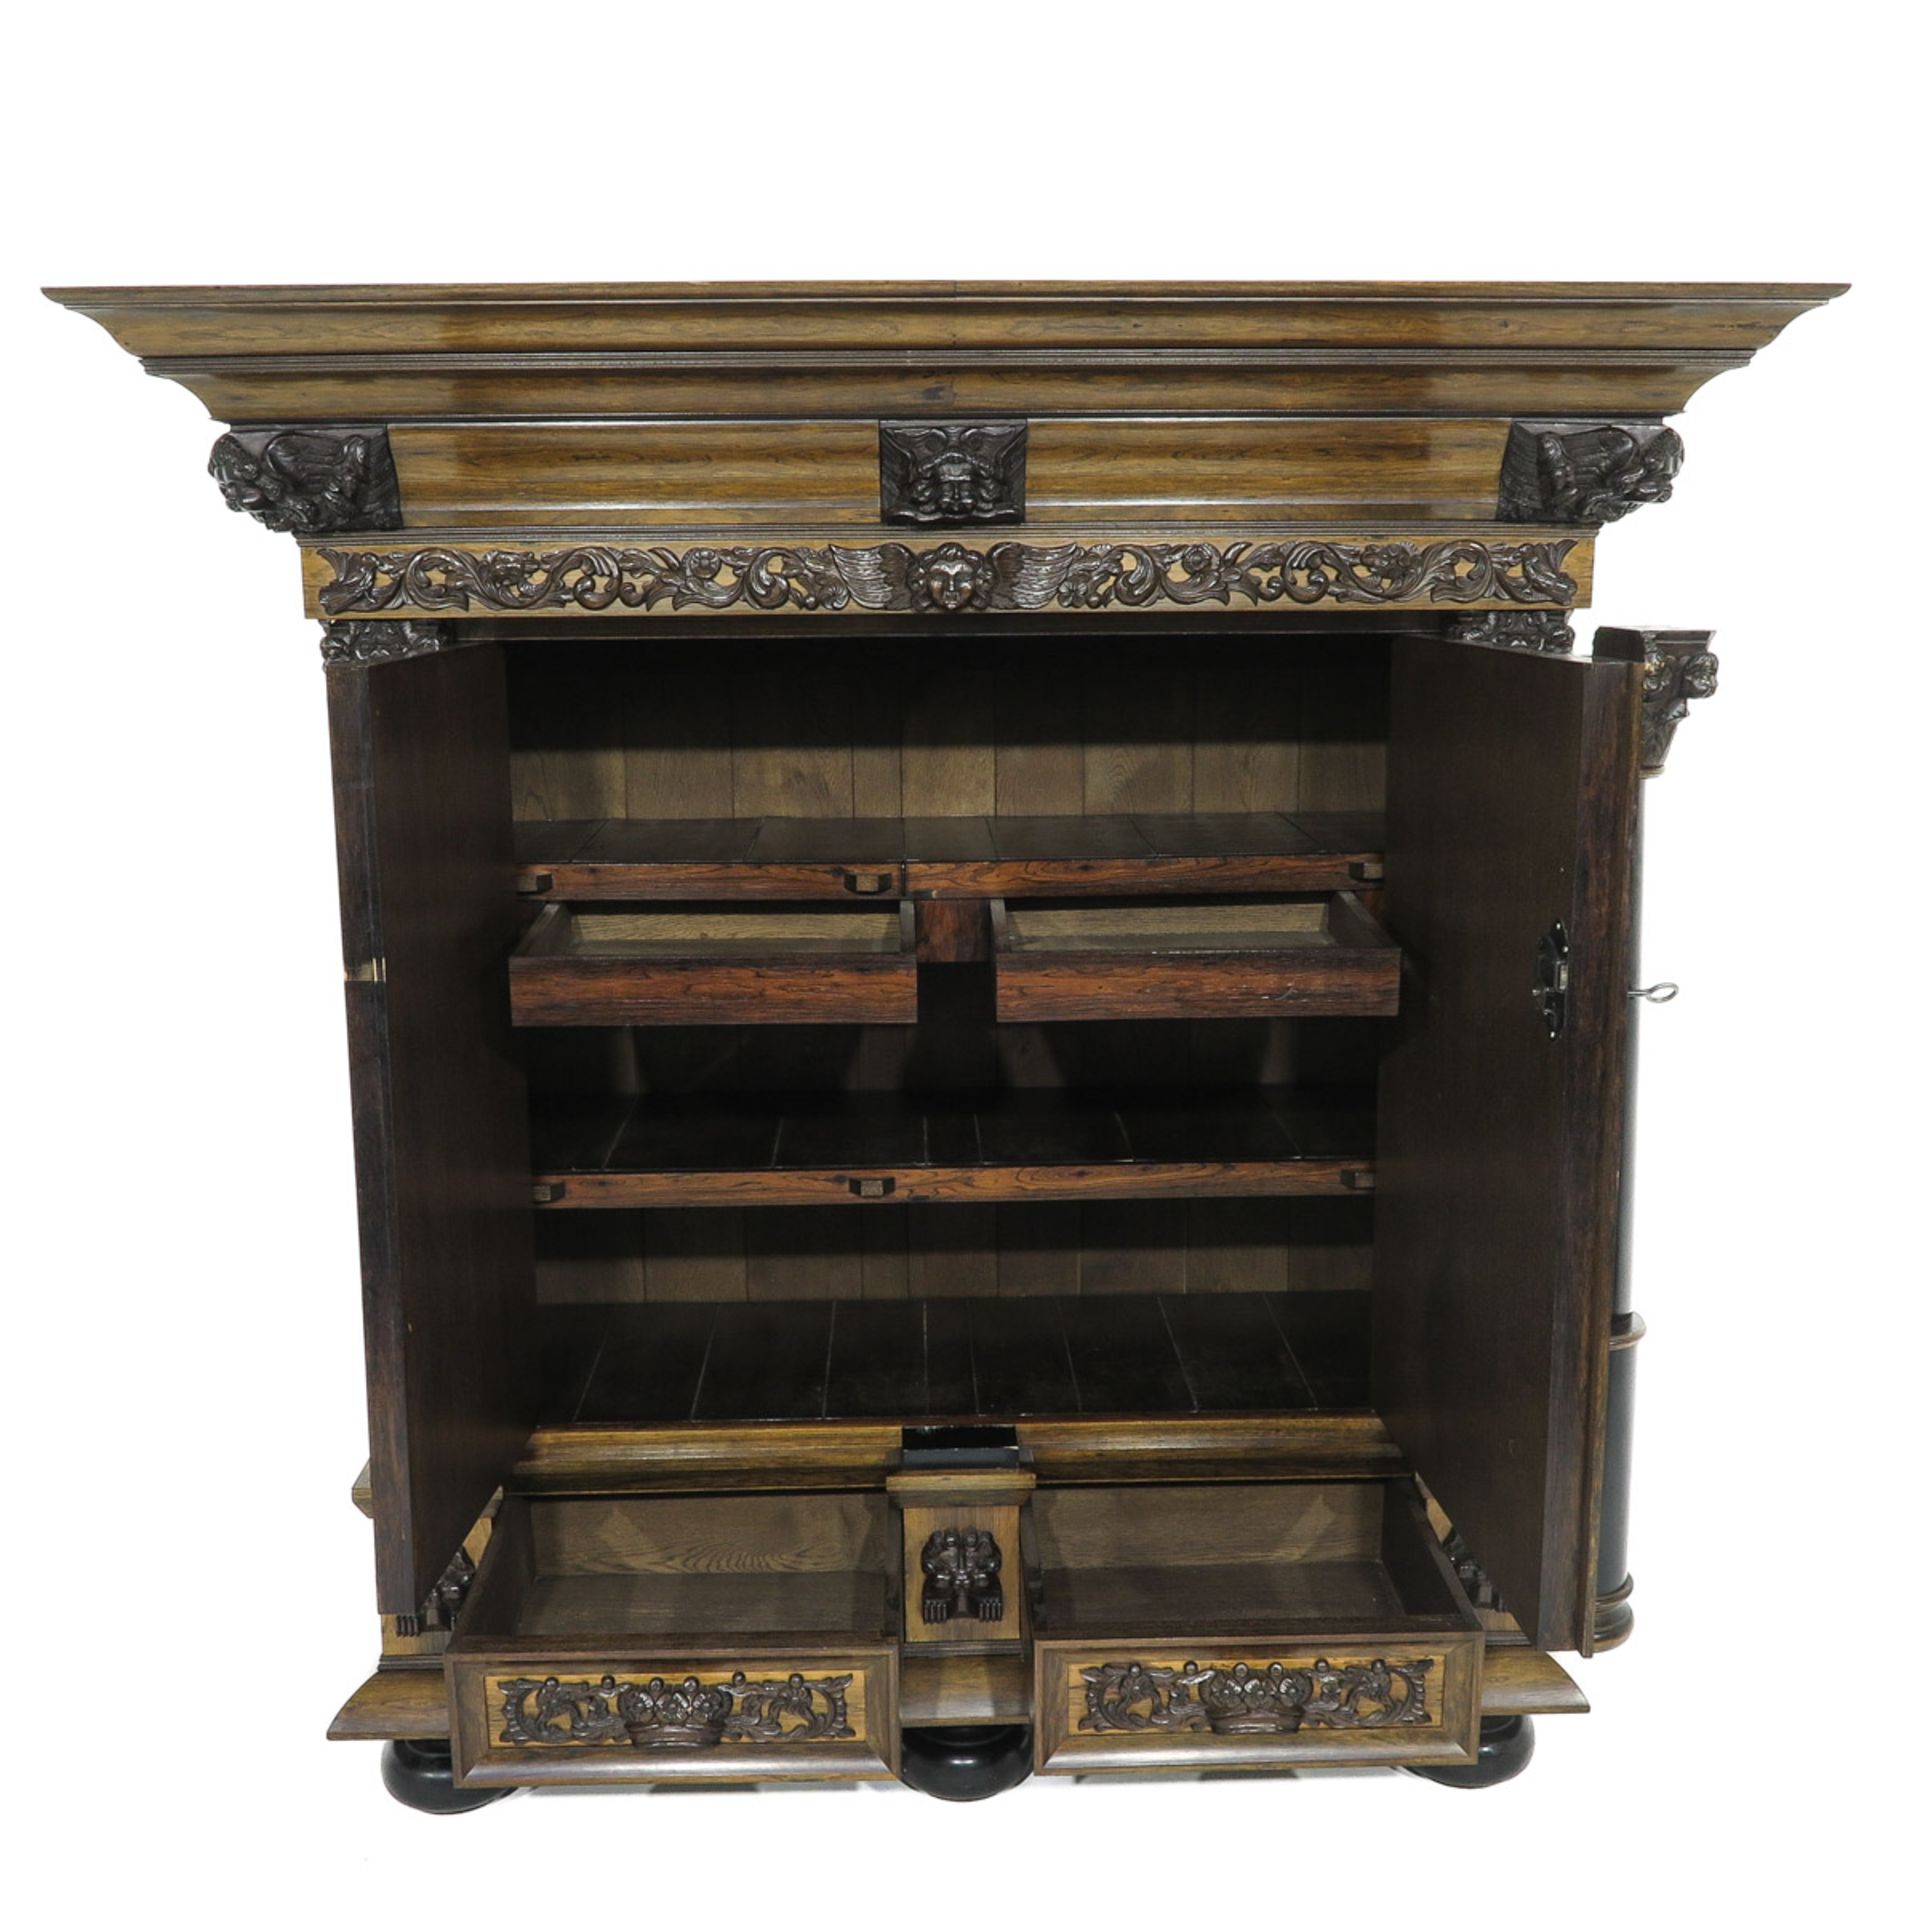 A Very Beautifully Carved Cabinet or Kussenkast - Image 5 of 10